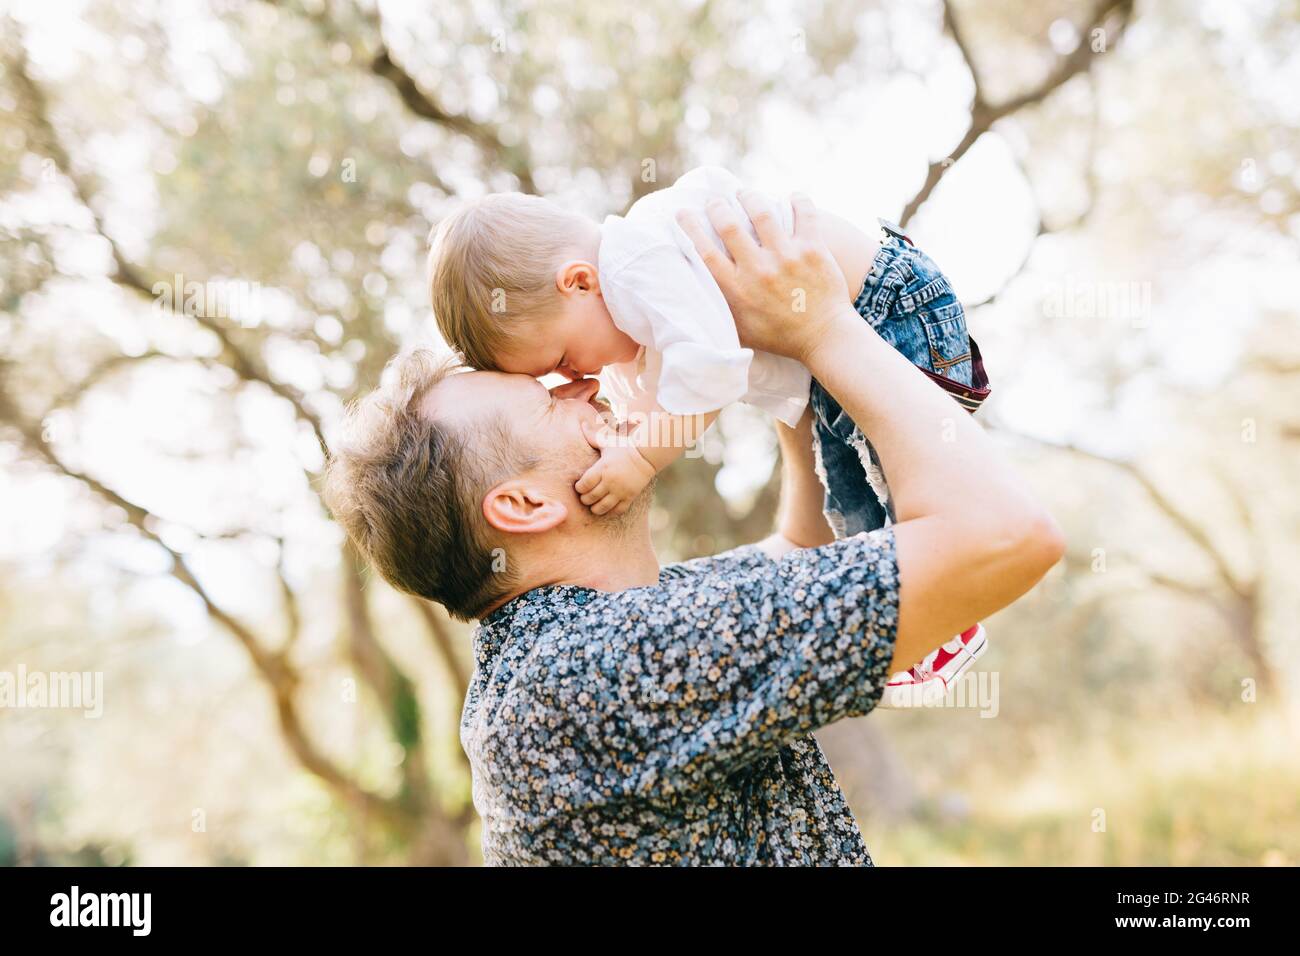 The father holds his son above him, they touching their noses, the son holds the father by the cheek Stock Photo